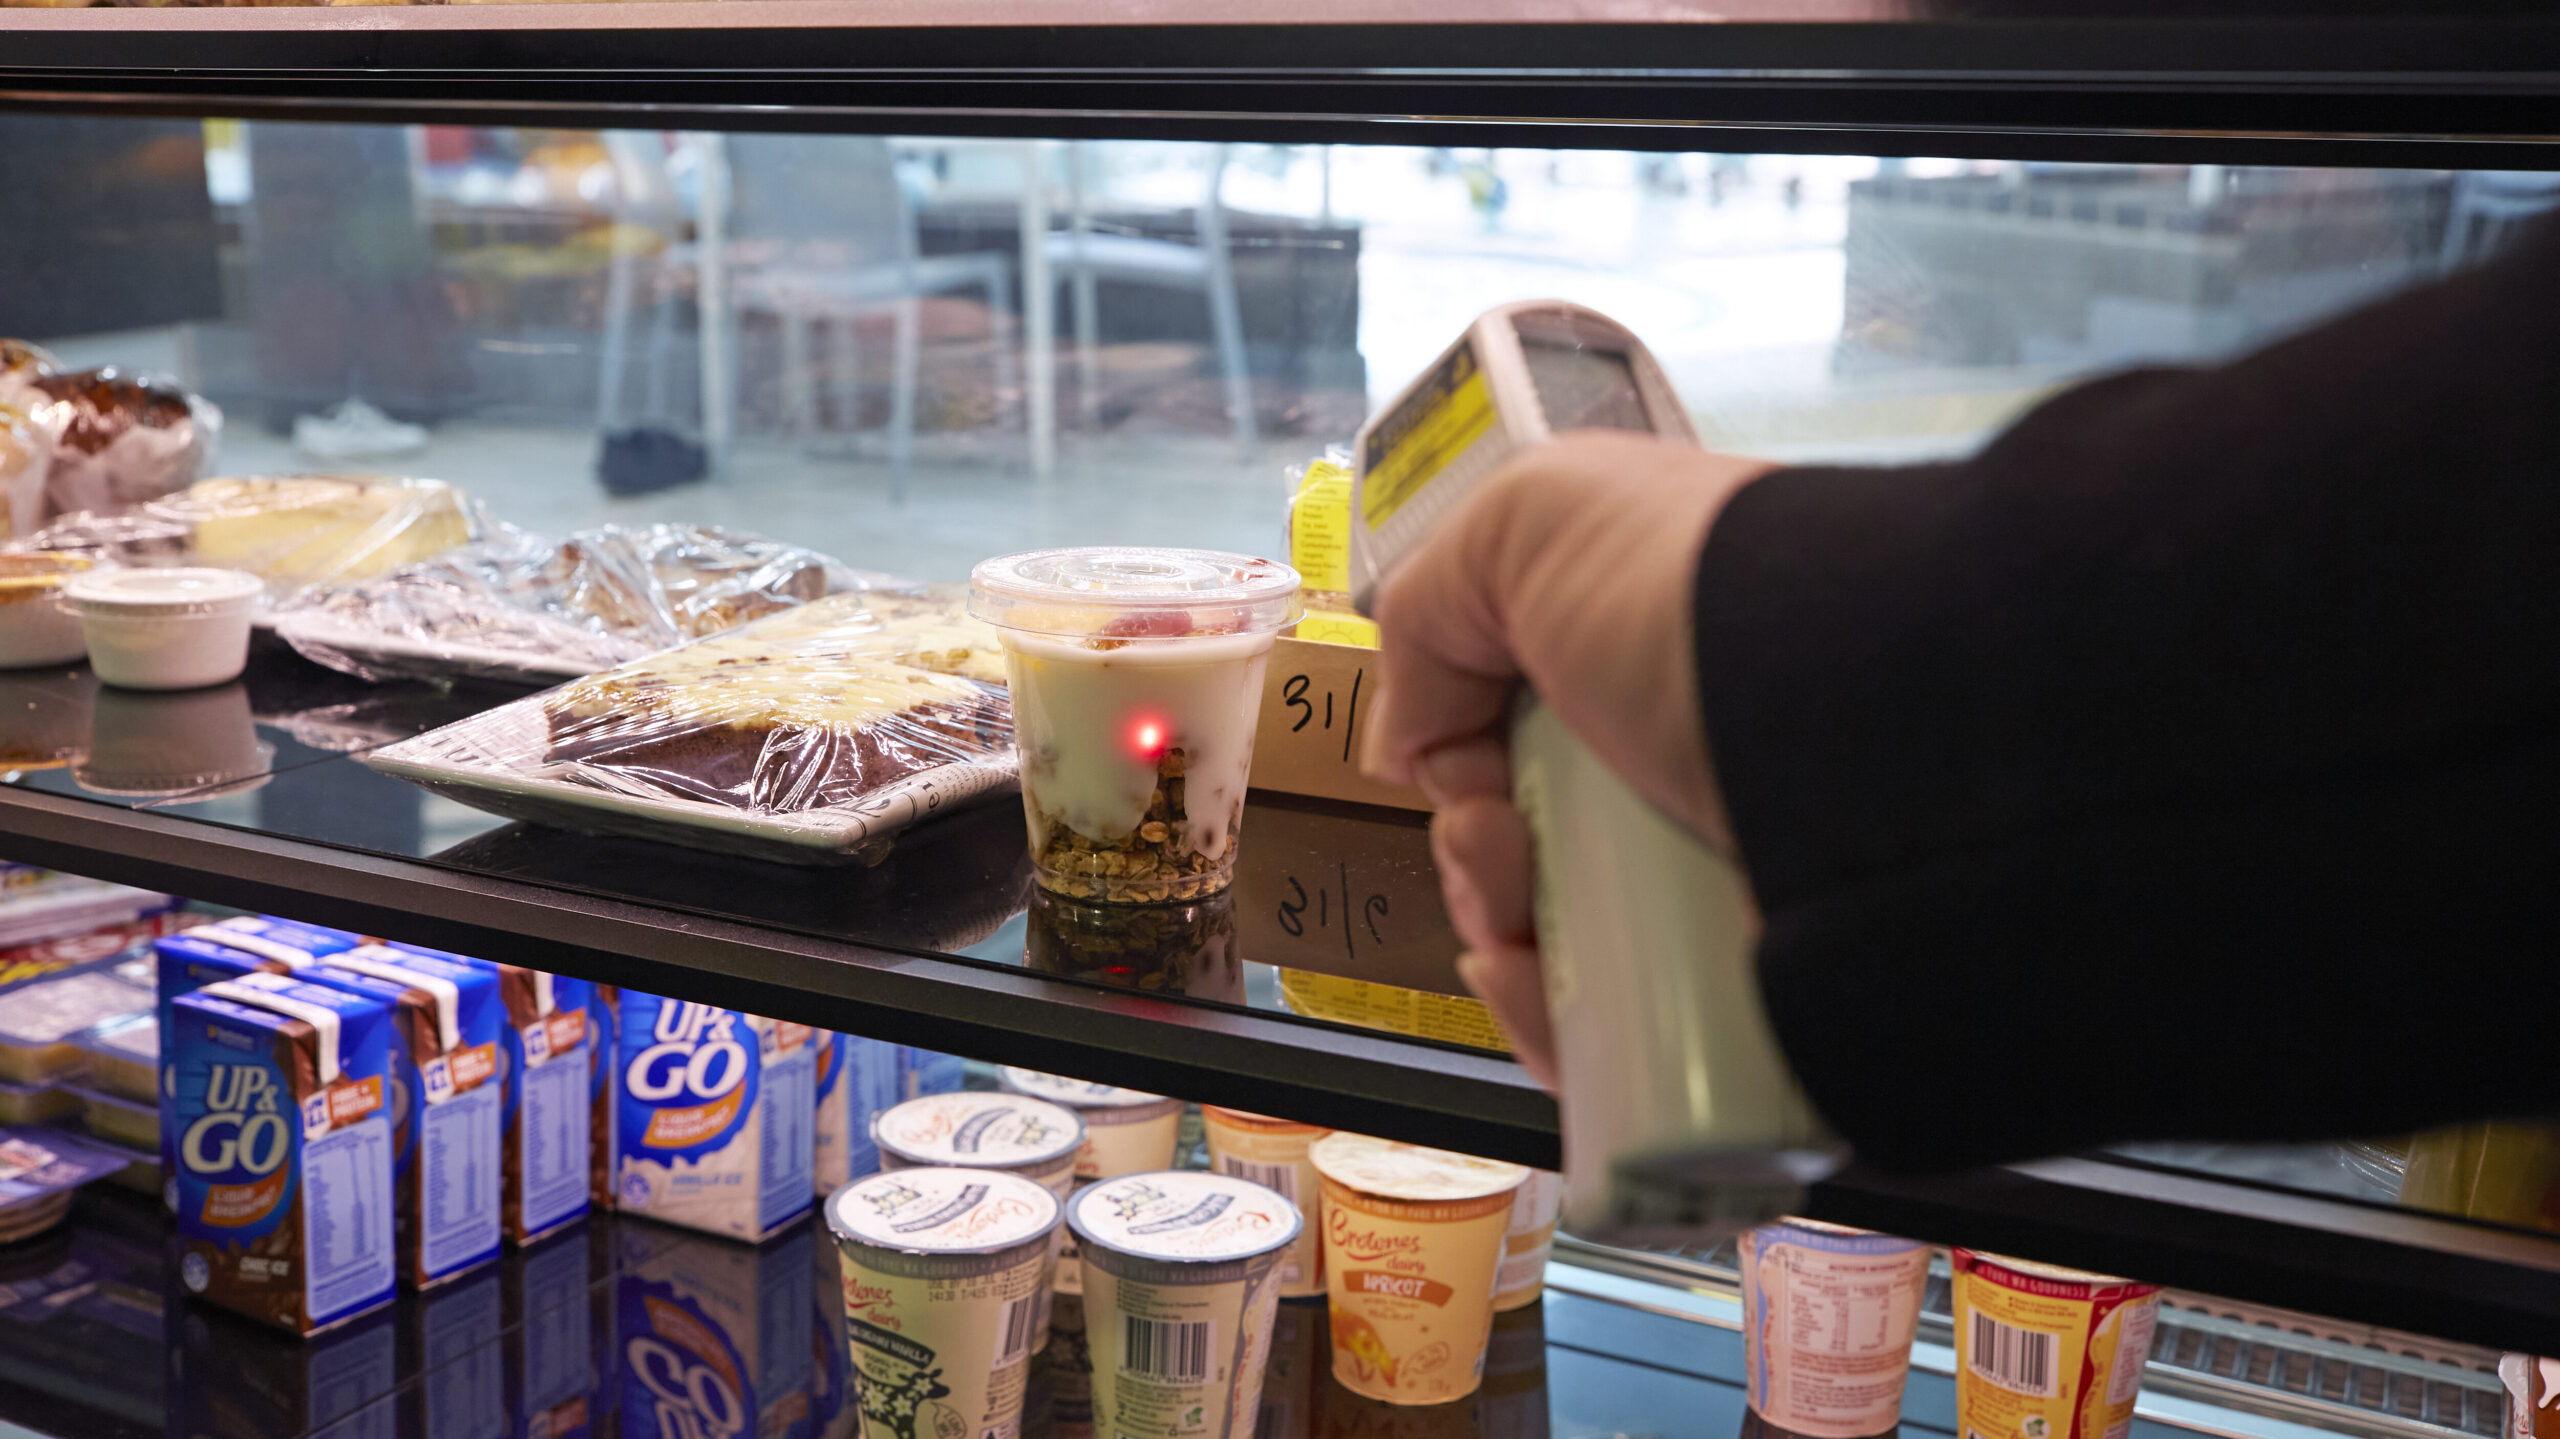 The temperature of food in a refrigerated display cabinet being checked with a handheld thermometer. 